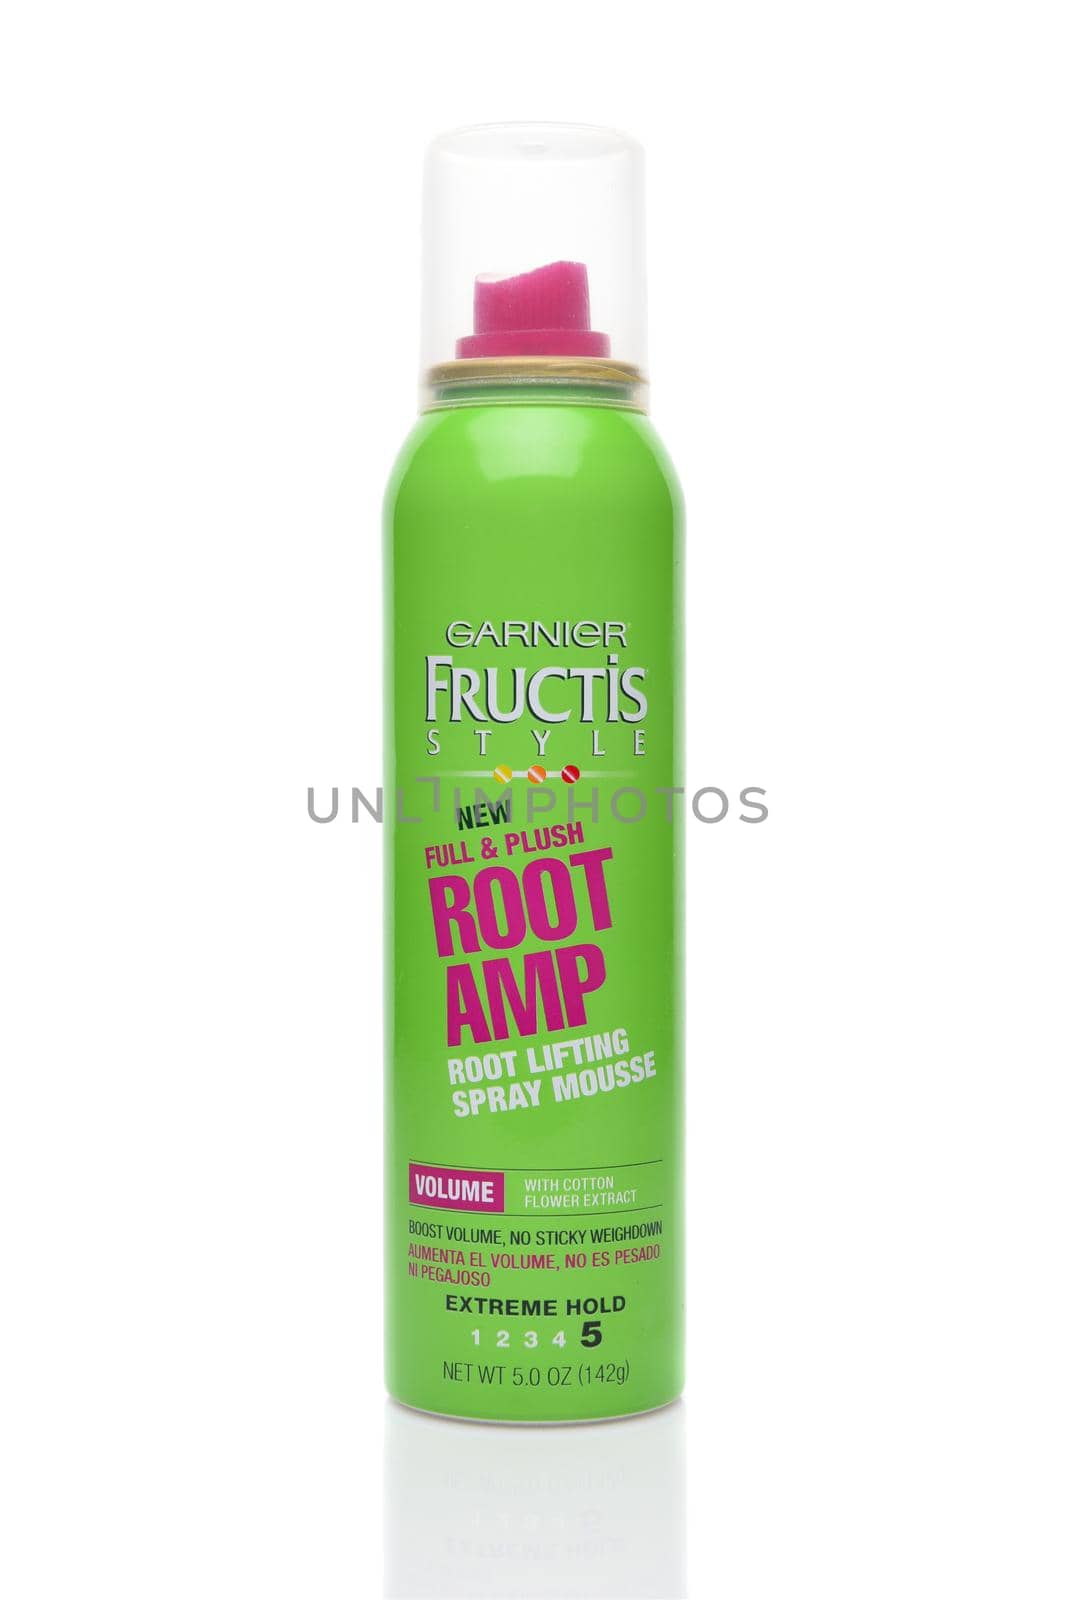 IRVINE, CALIFORNIA - AUGUST 20, 2019: A 5 ounce can of Garnier Fructis Root Amp Spray Mousse. 